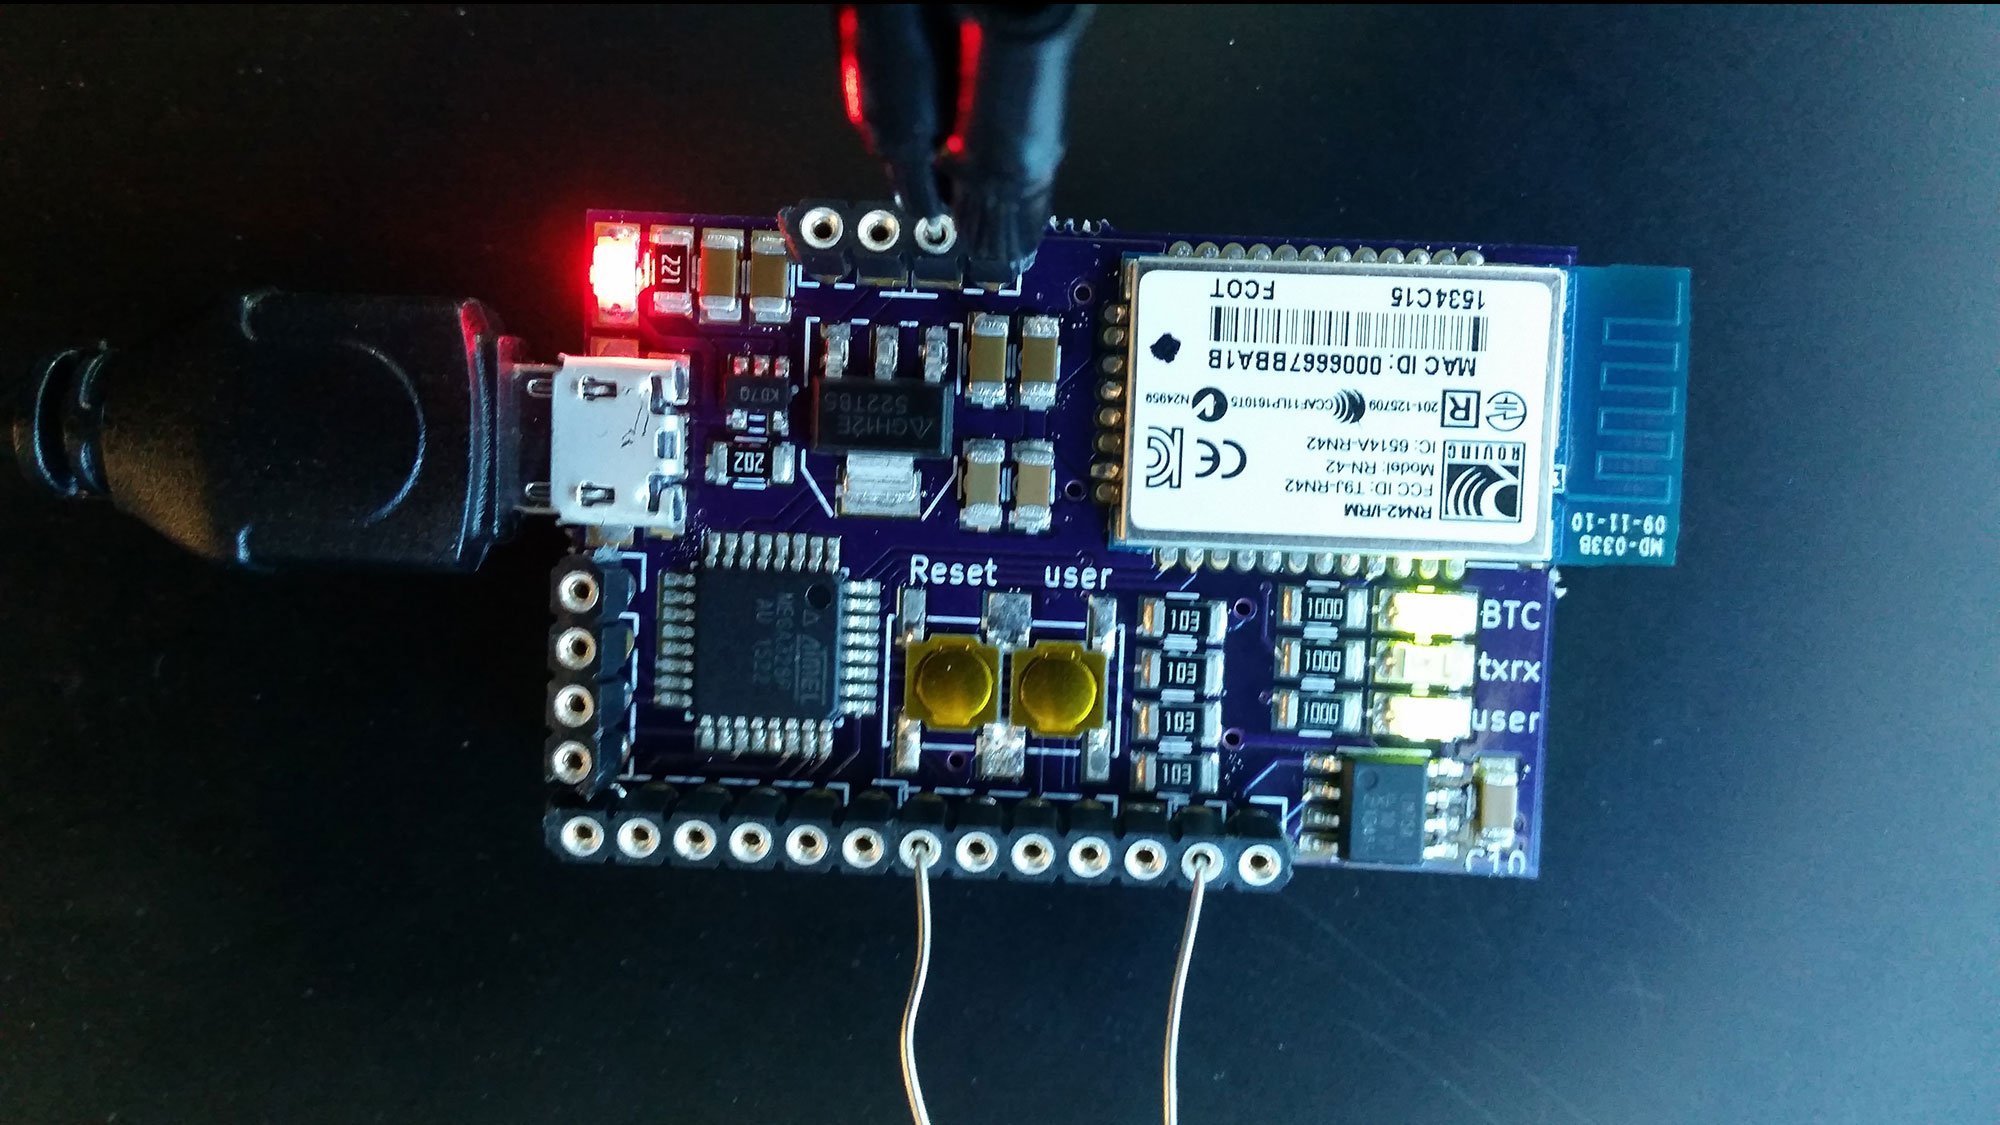 Sensor connected to smartphones to test COVID-19